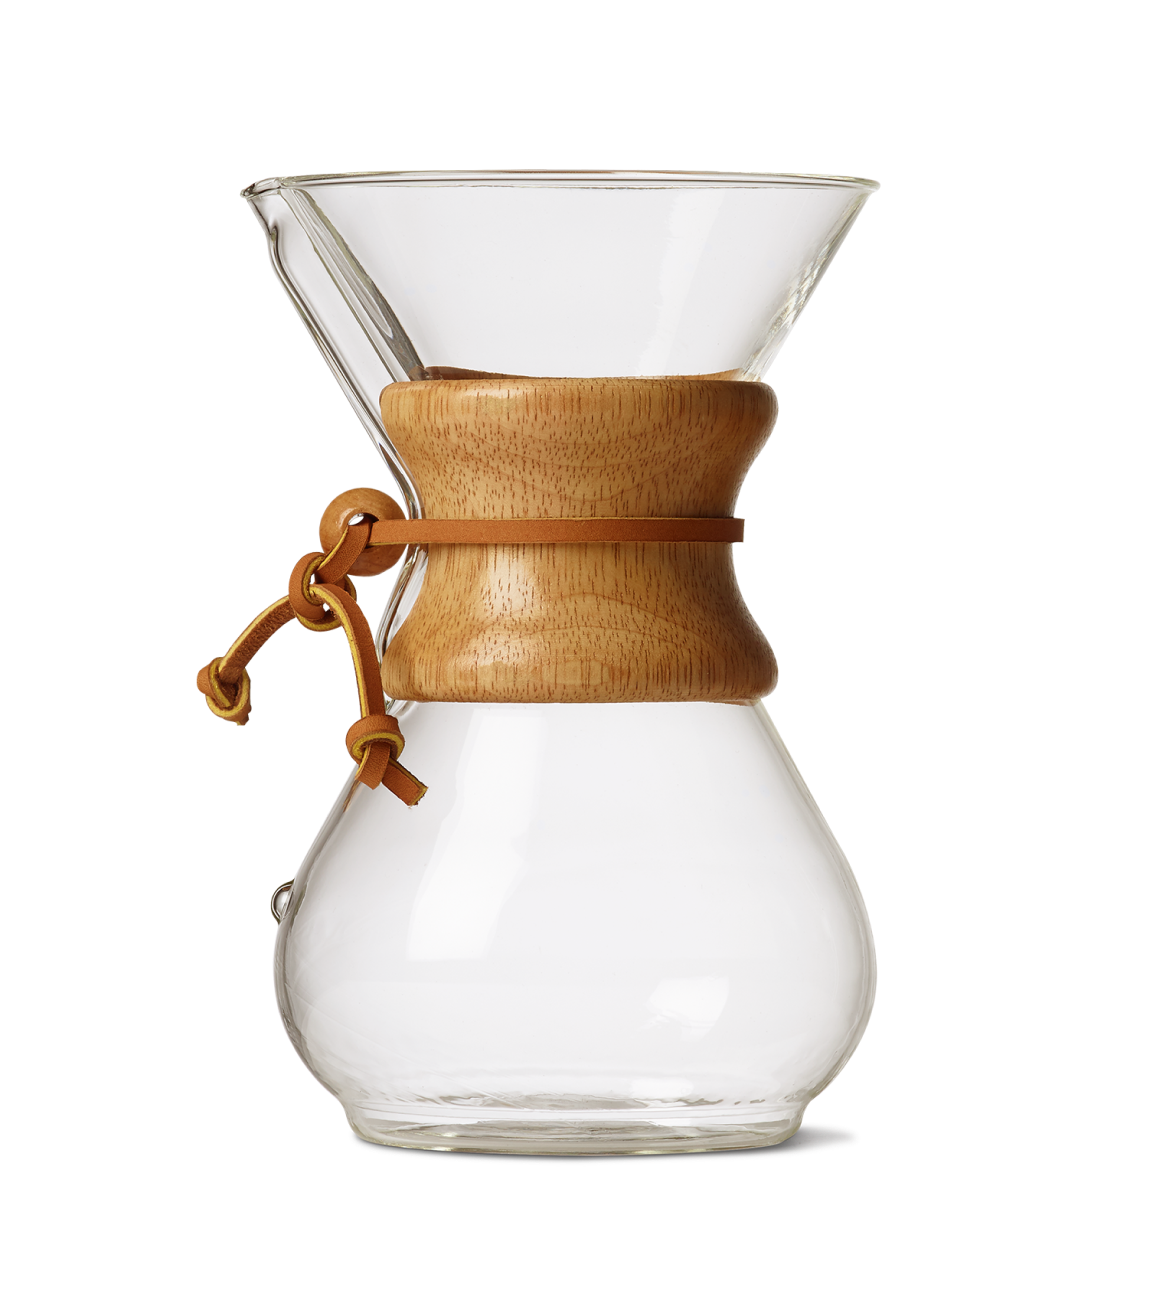  HEXNUB – 6 Cup Cozy for Chemex Collar and Handle Pour